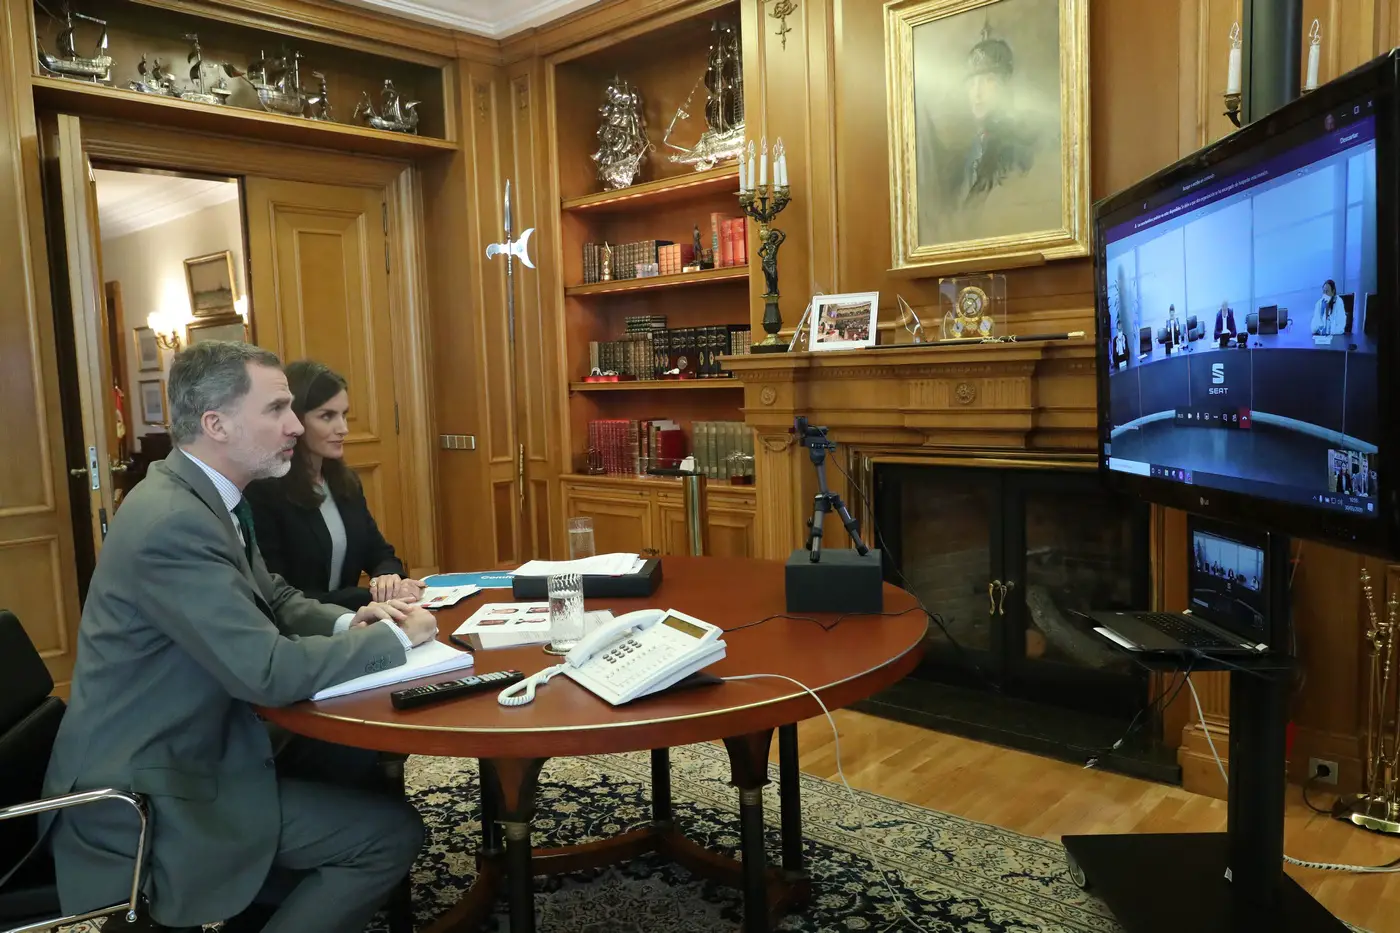 Queen Letizia and King Felipe held a video conference